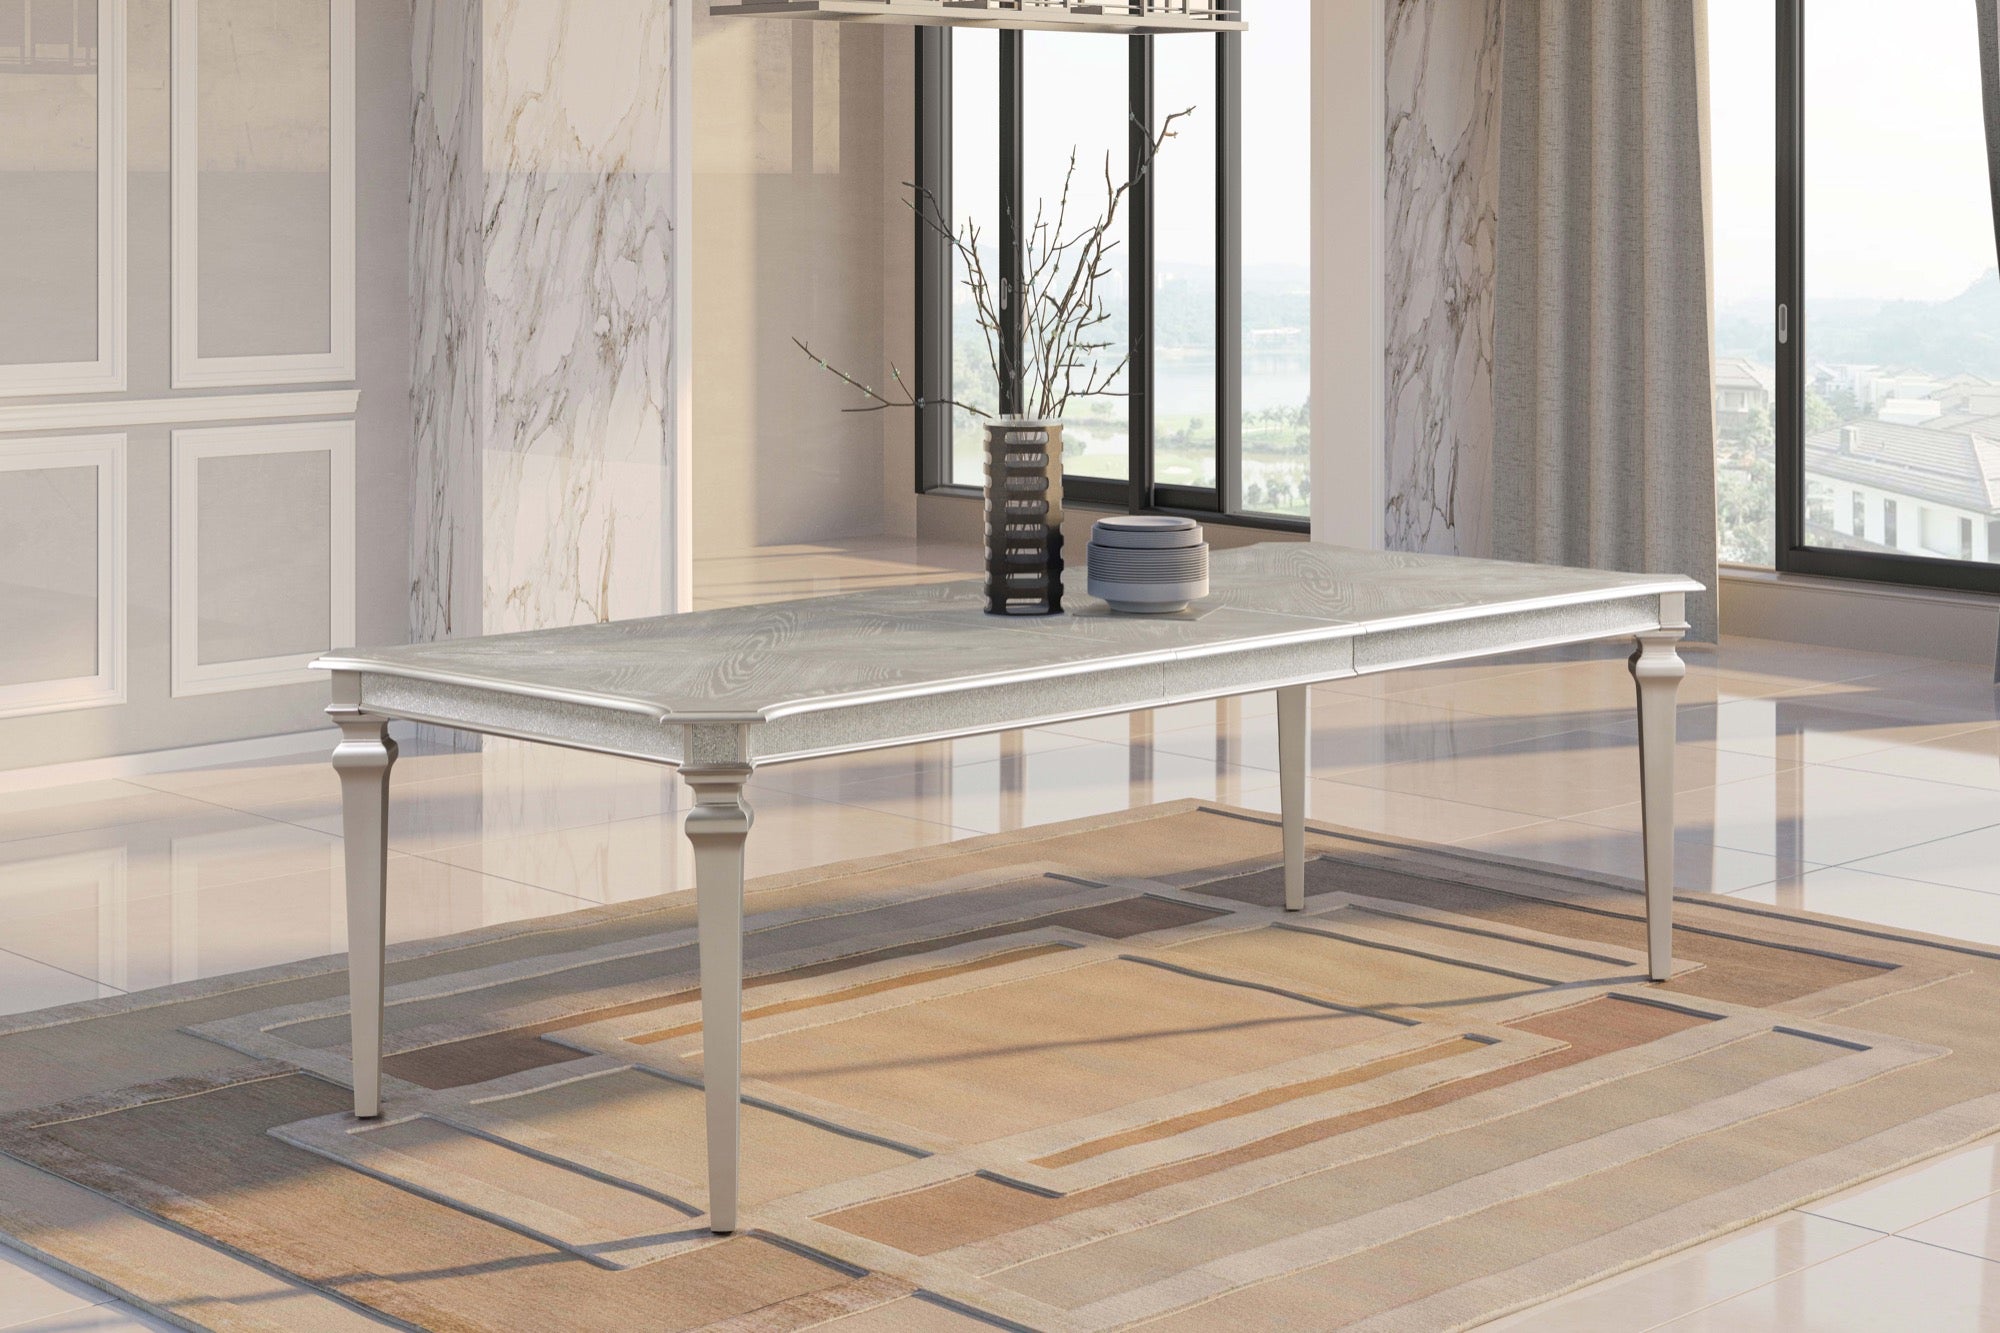 Evangeline Rectangular Dining Table With Extension Leaf